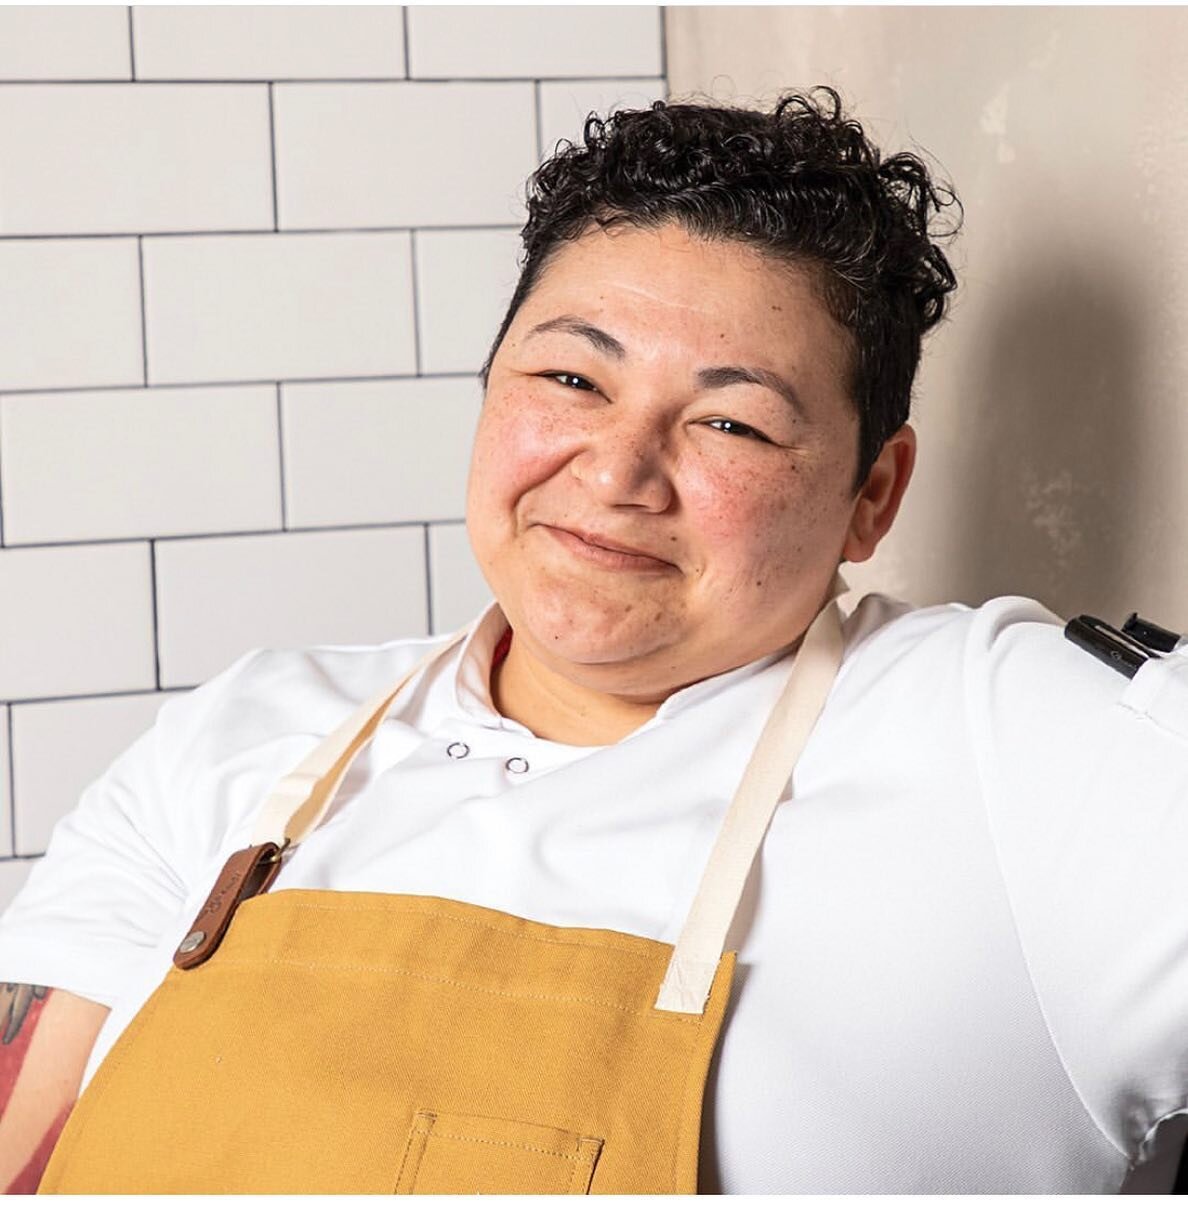 Y&rsquo;all!!! This smile says it all! Chef Melissa was named one of 2021s Chefs to Watch! We are so humbled and grateful for her recognition in @louisianacookin ! Your dedication, drive, passion and determination have not gone unnoticed @chefmelissa